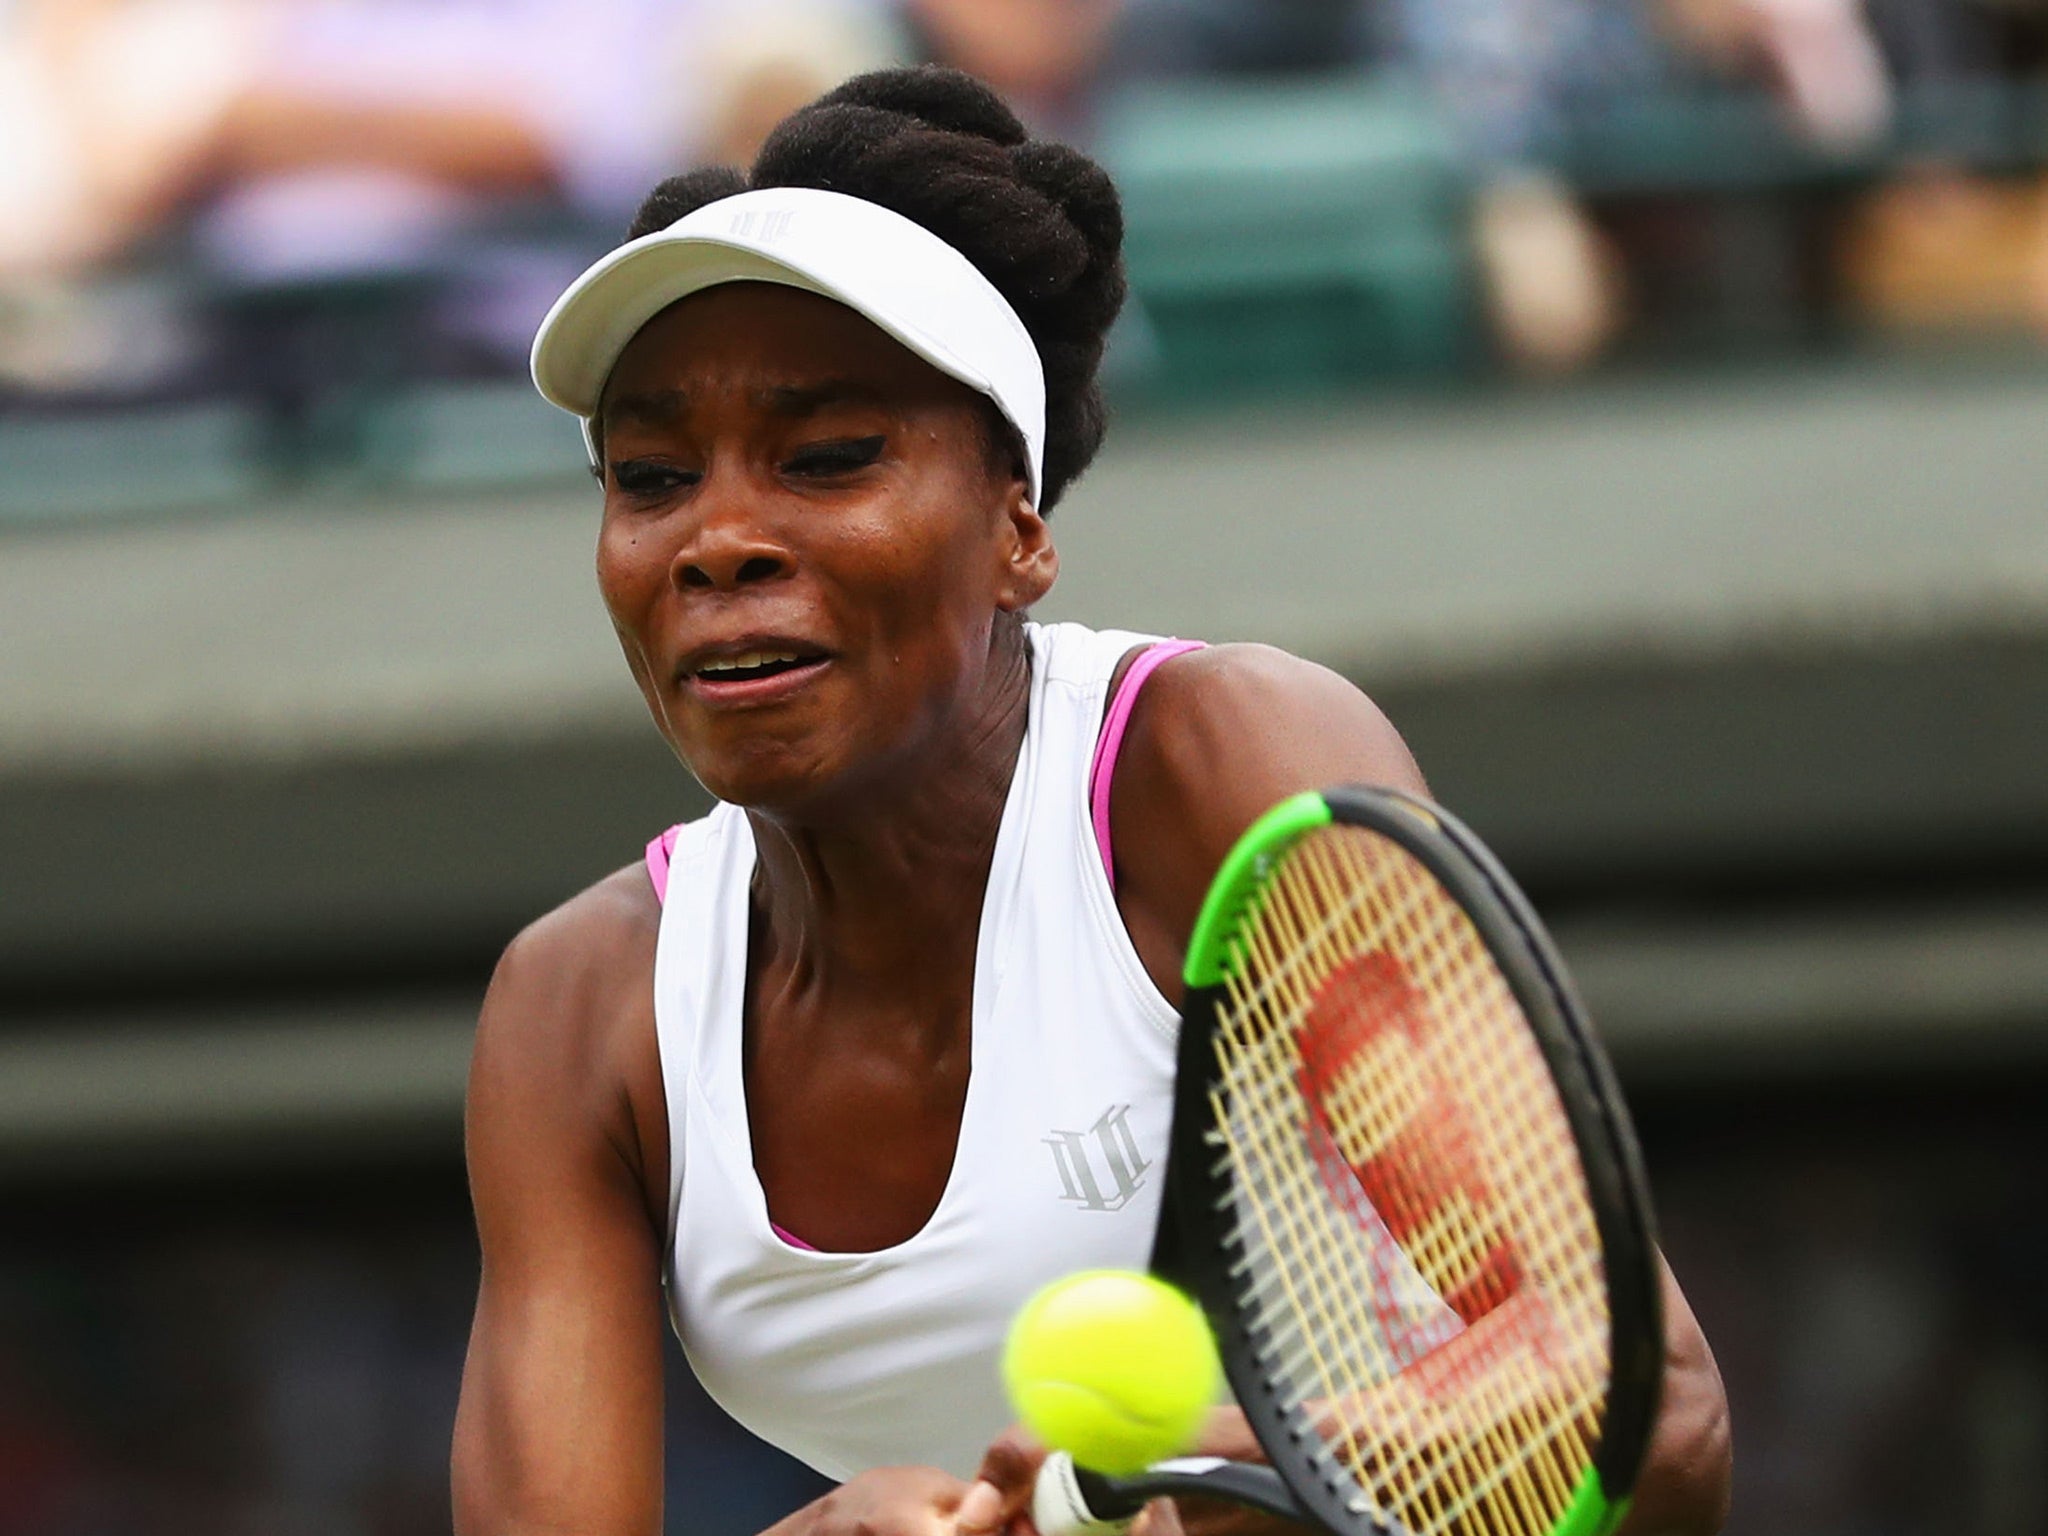 Venus Williams wore the bright pink bra for the majority of her first round win